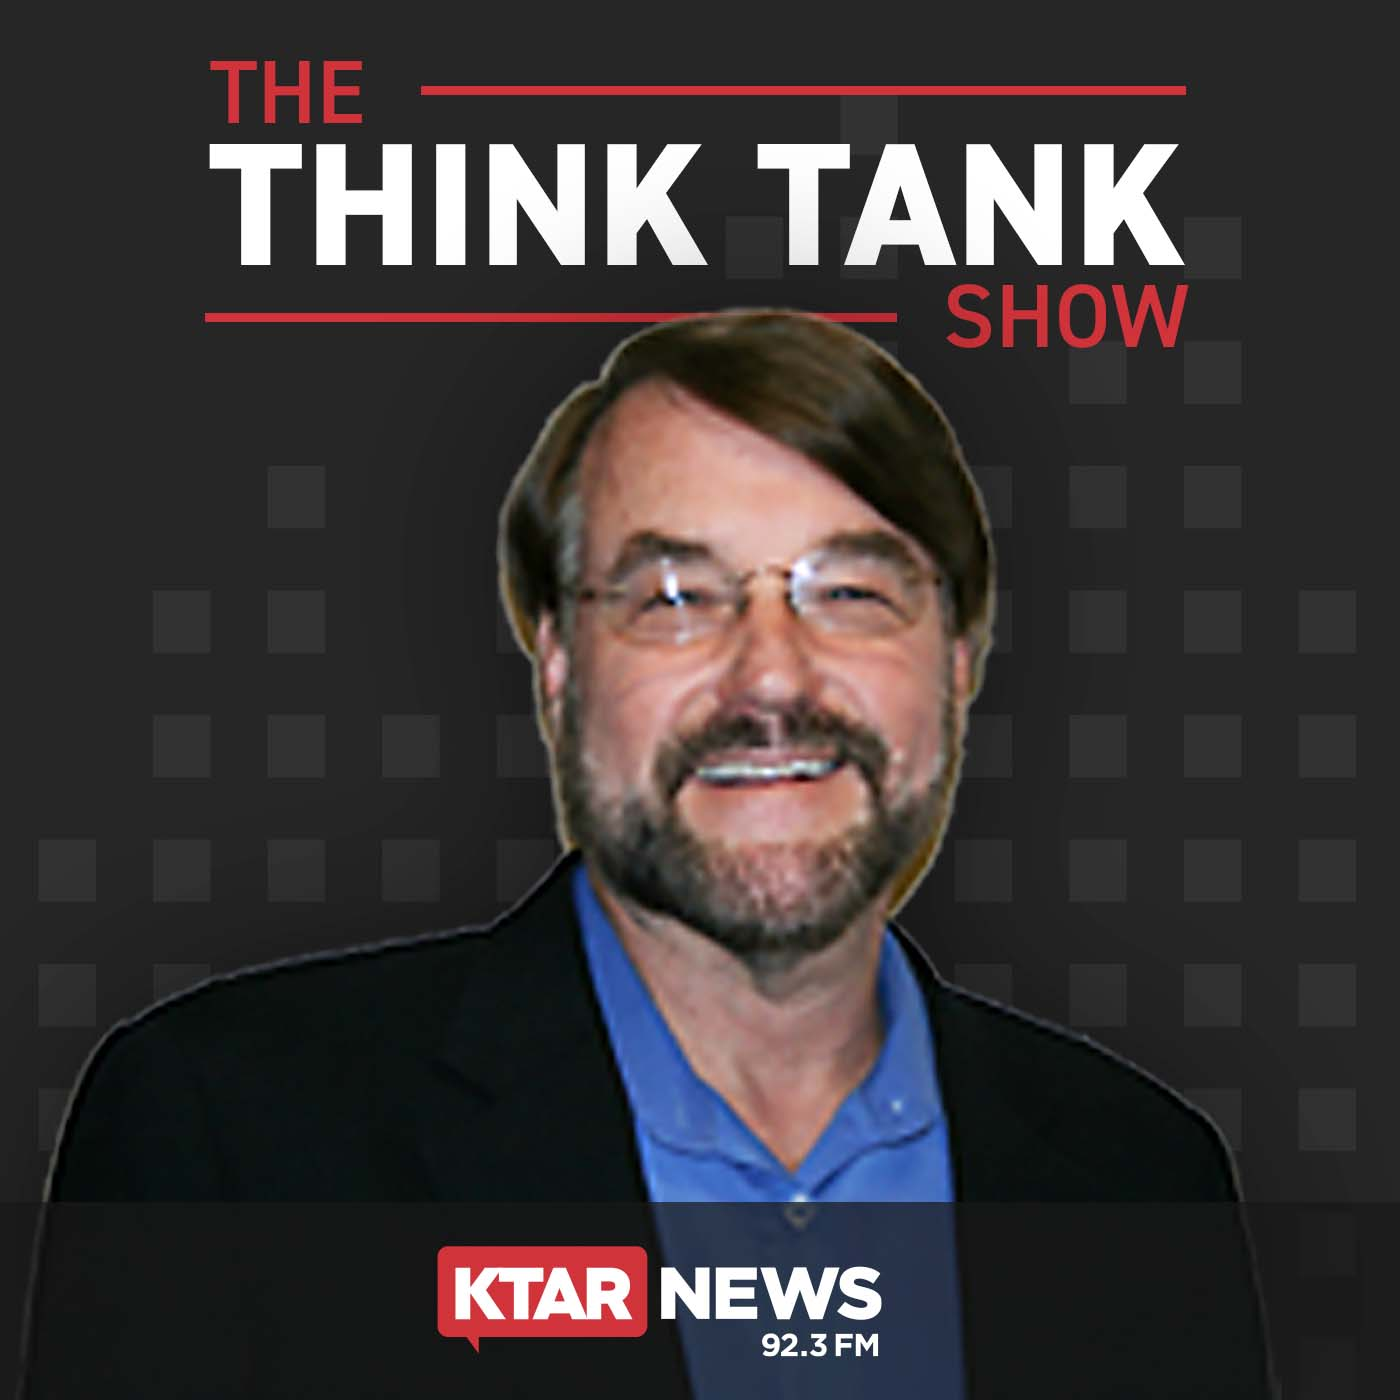 THINK TANK- Guests Tyler Montague and Chris Love